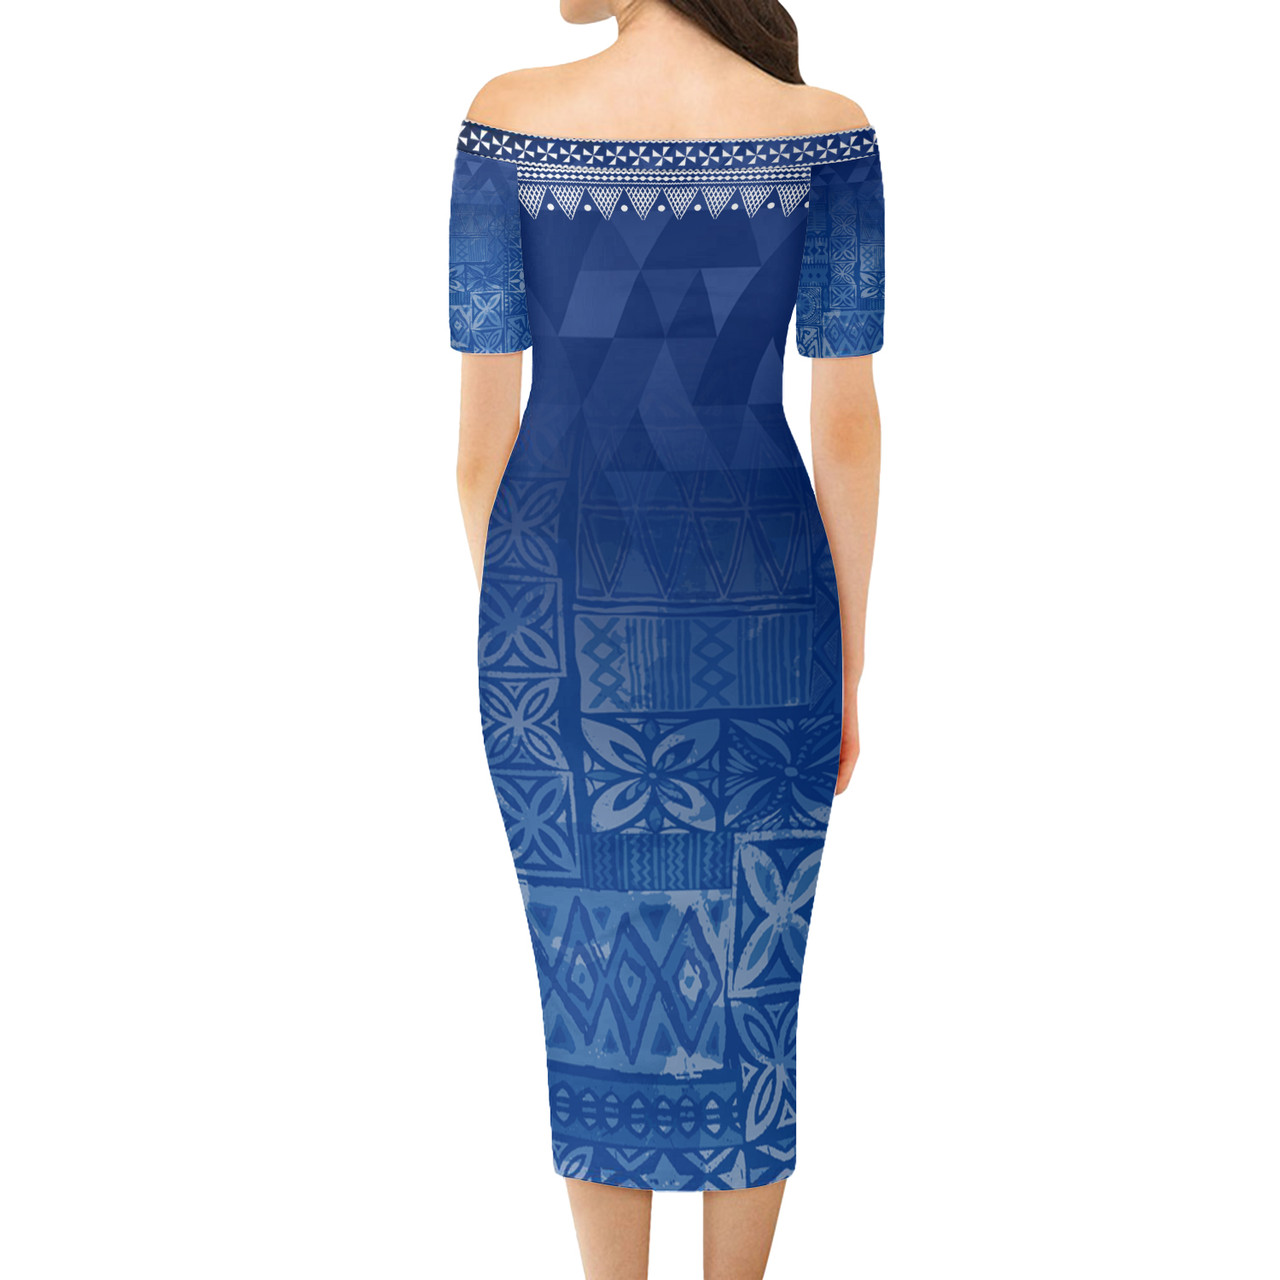 Fiji Short Sleeve Off The Shoulder Lady Dress Lowpolly With Tribal Motif